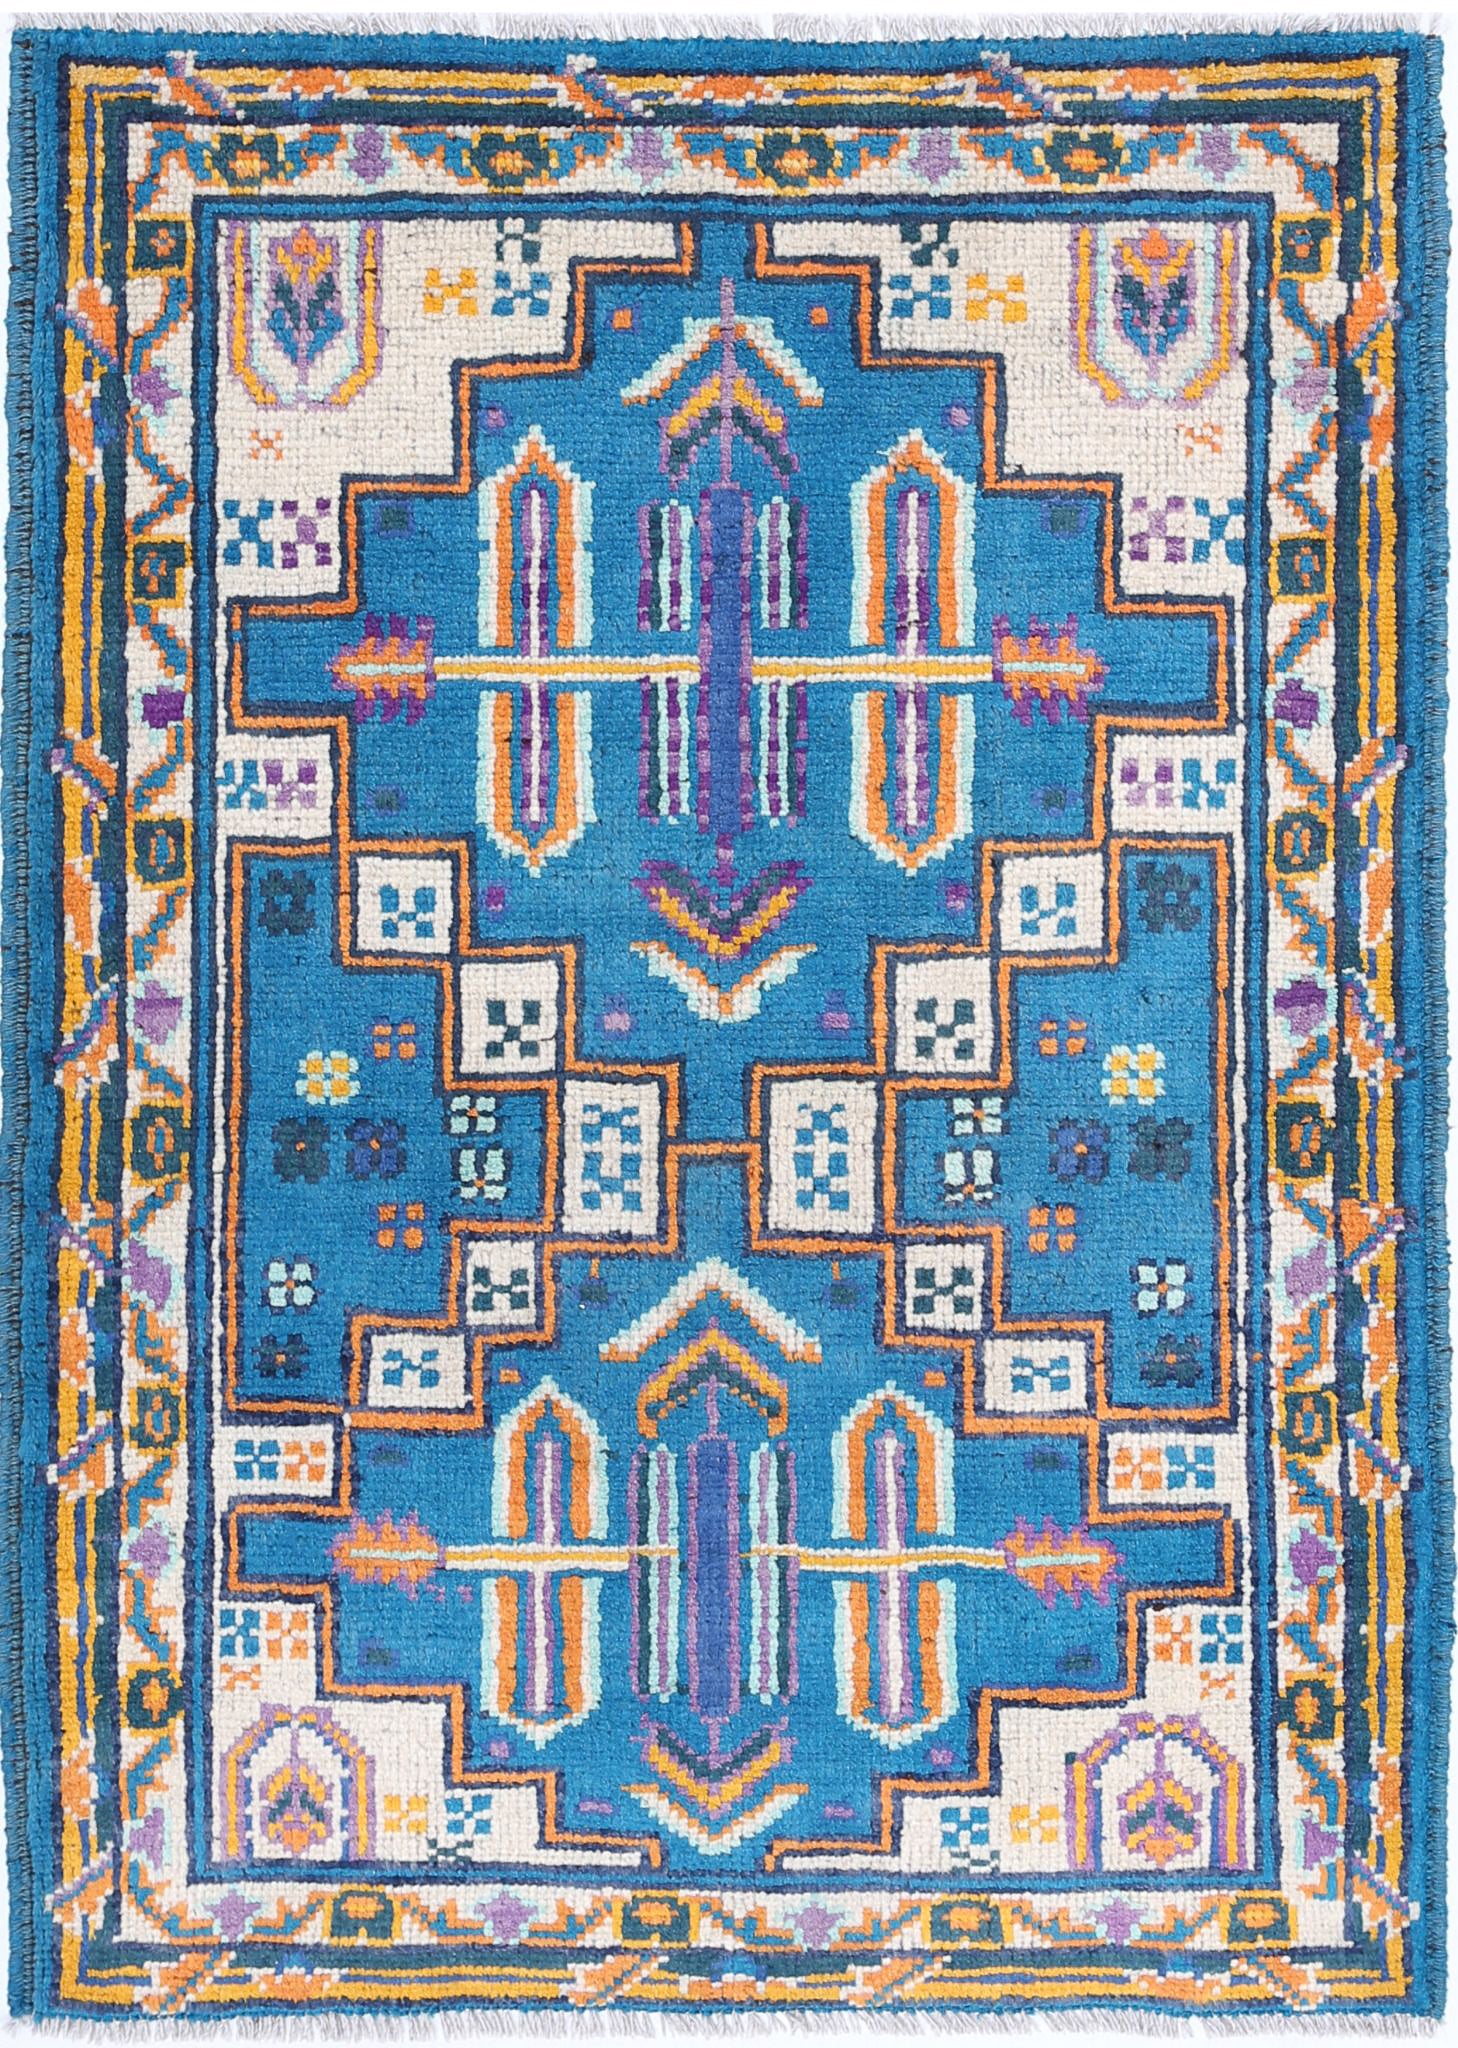 Revival-hand-knotted-qarghani-wool-rug-5014016.jpg